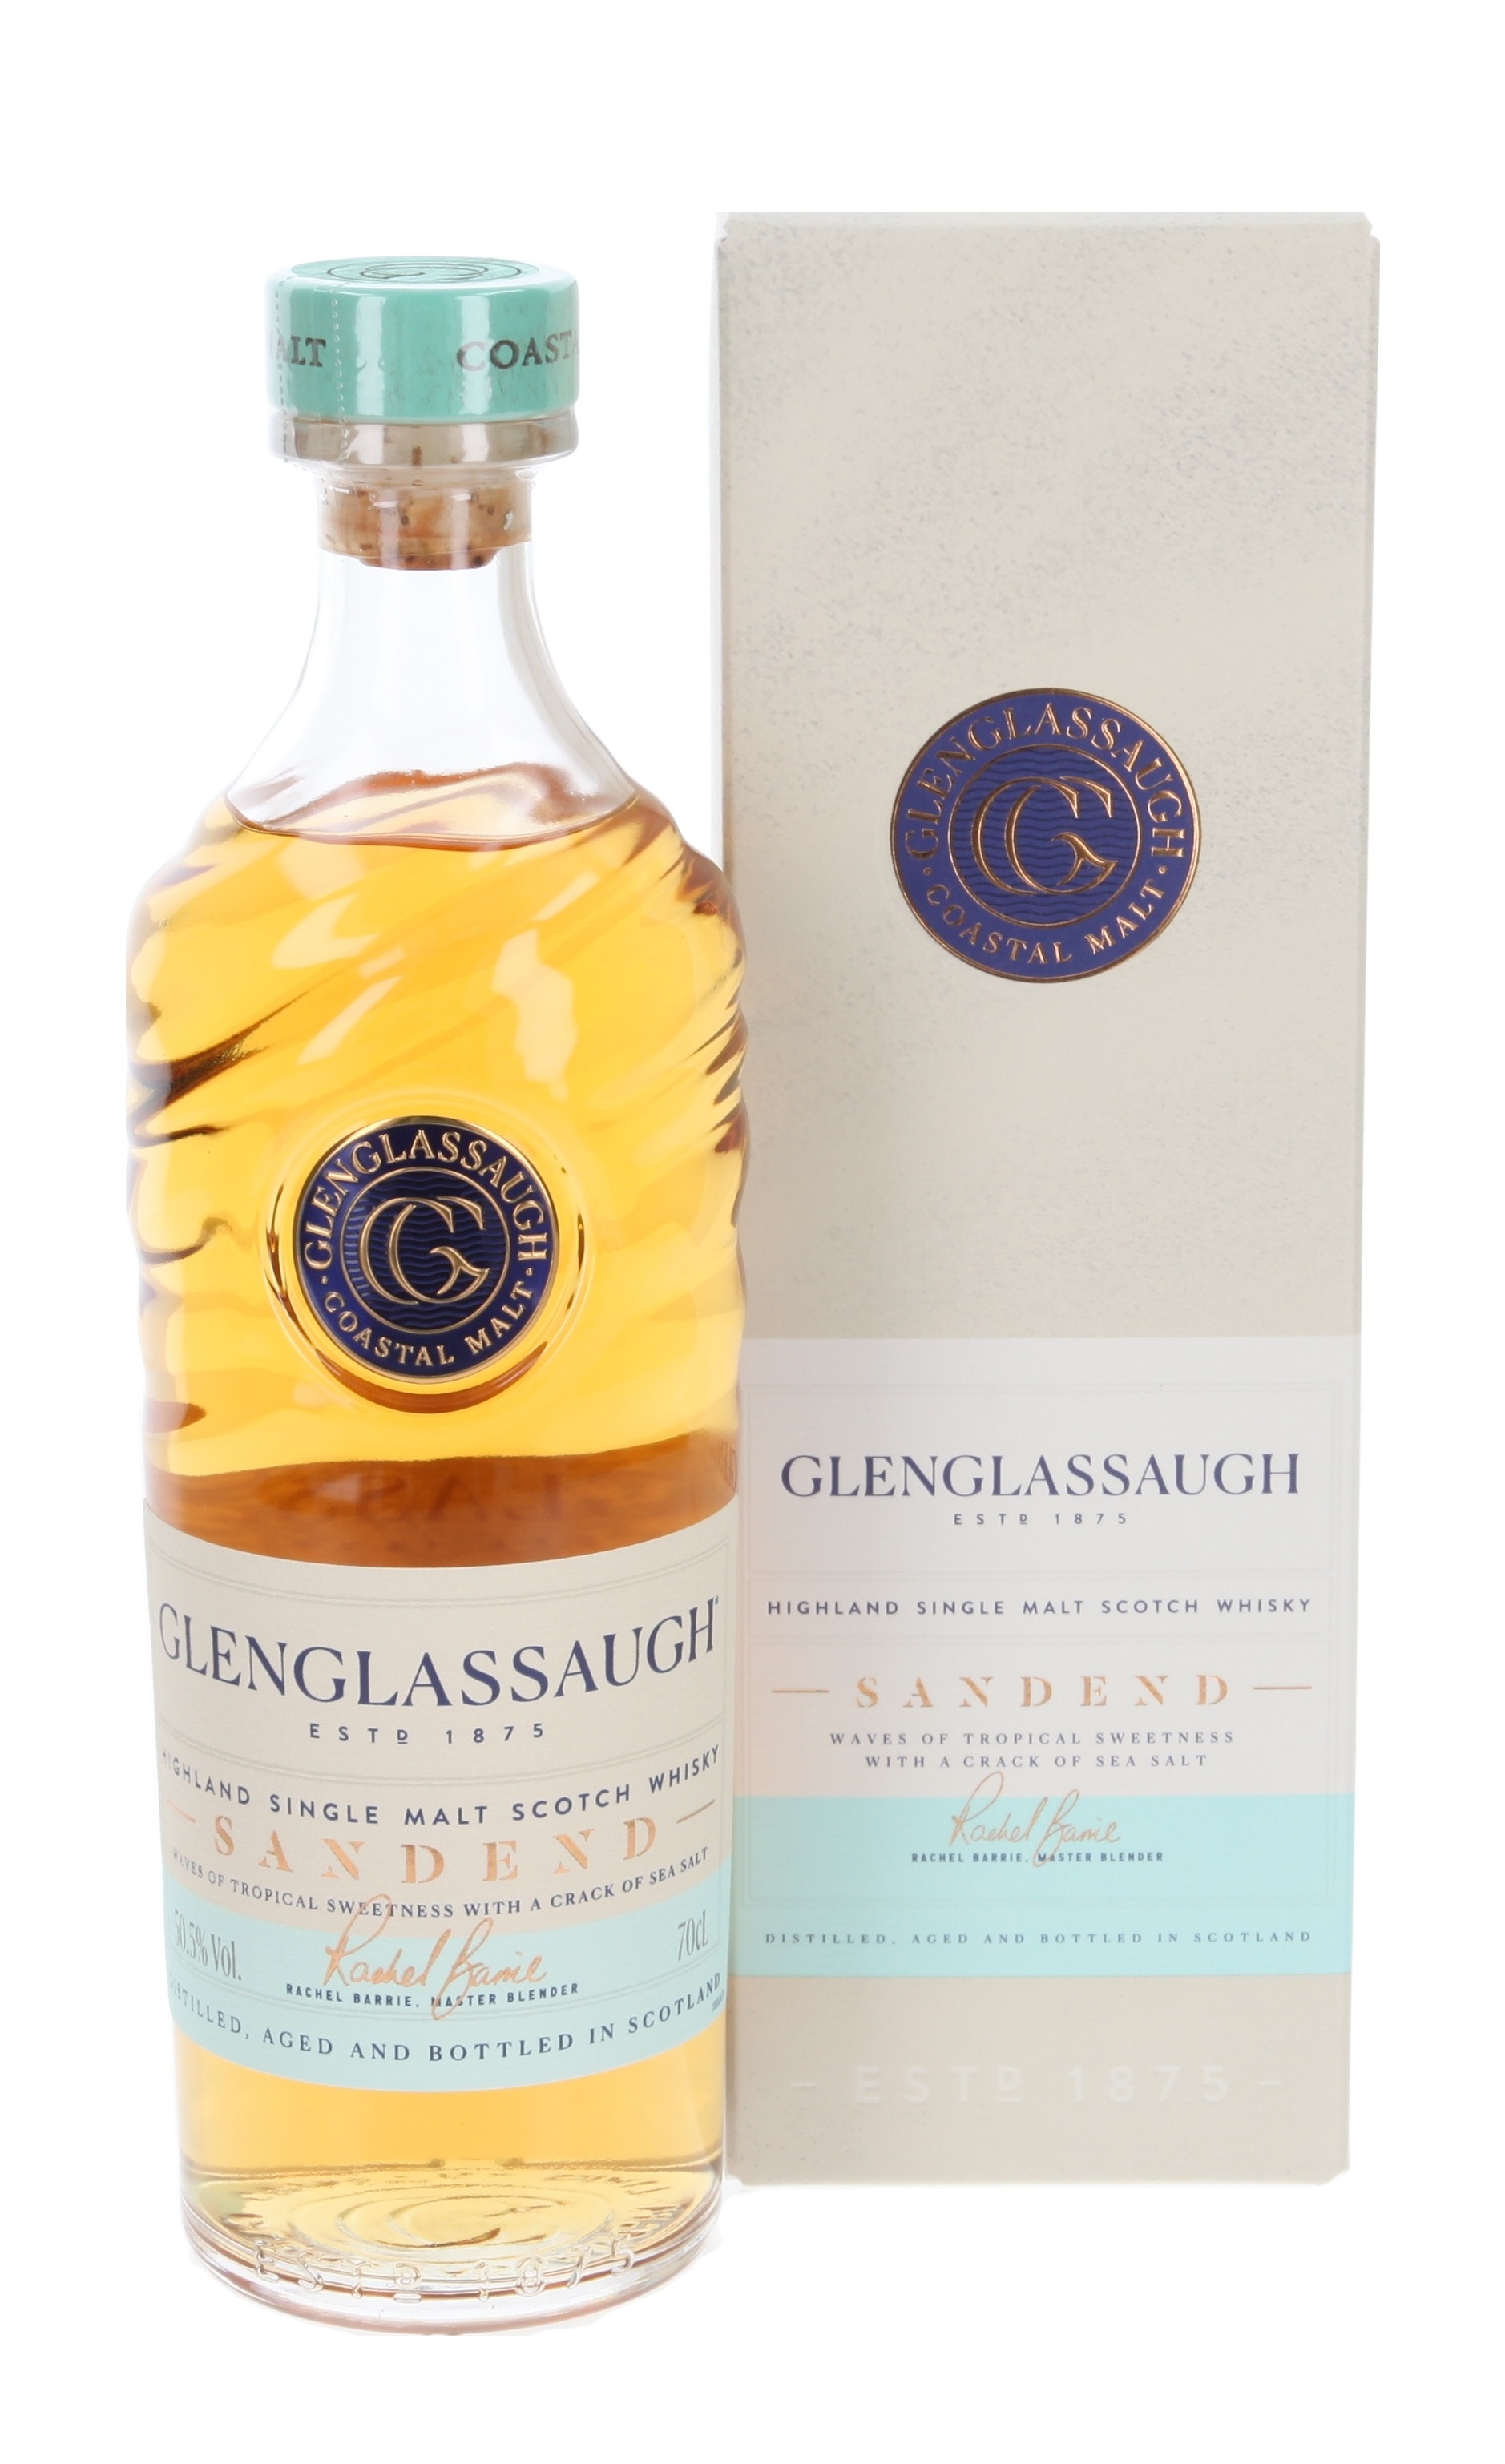 https://www.whisky.de/shop/out/pictures/master/product/1/ximage_GGLAS0SA0_1.jpg,q1689256222.pagespeed.ic.BFsAc31byG.jpg